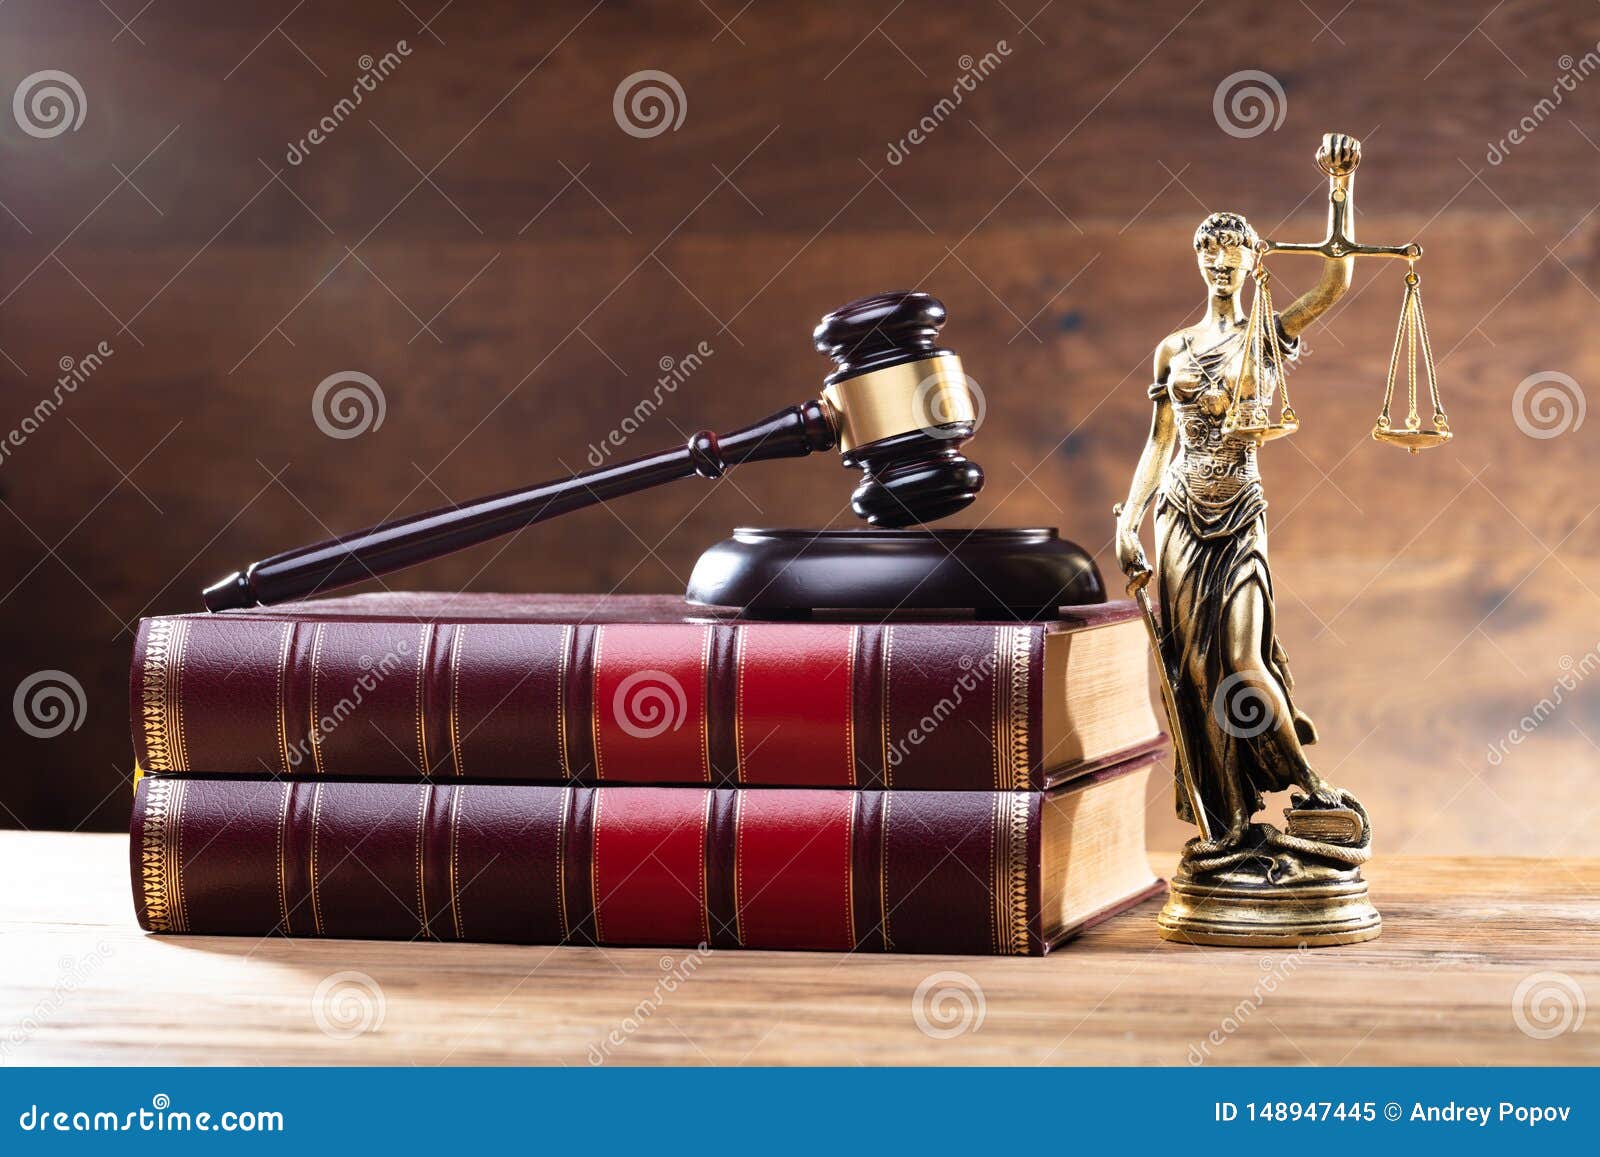 lady justice near gavel over law book